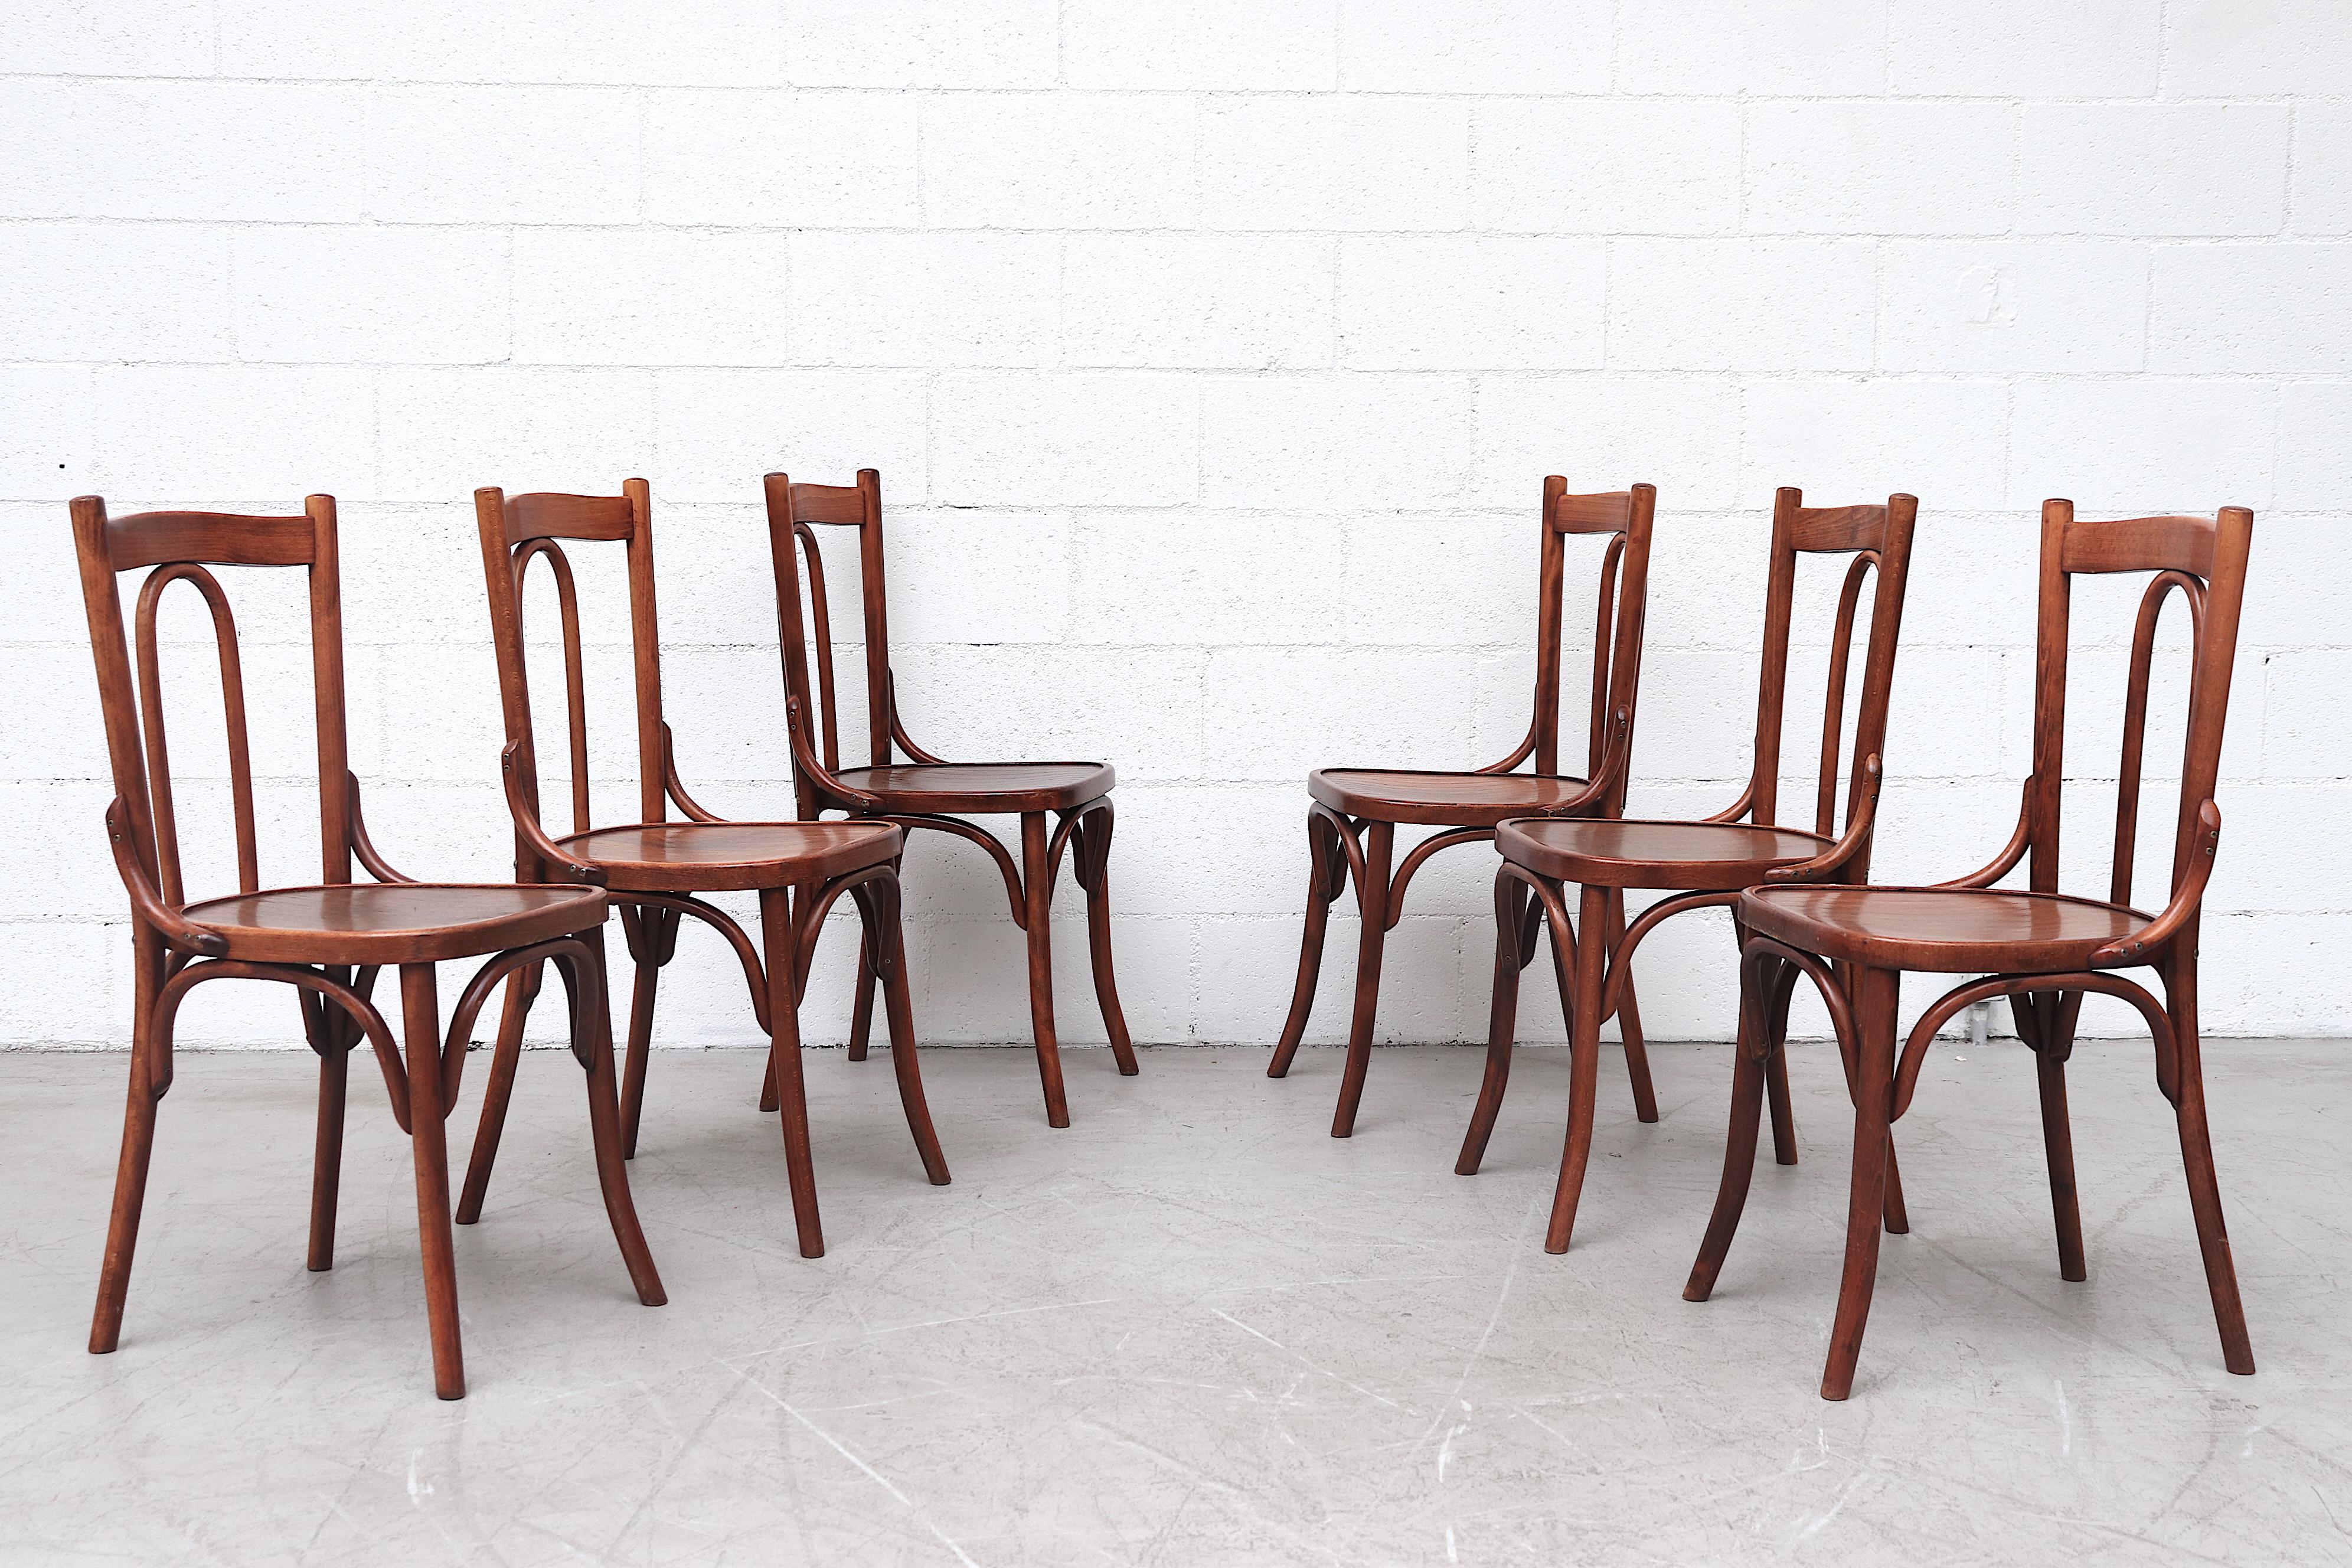 Handsome Thonet Style Bistro Chairs with Bentwood Bowed Frames. In Overall Good Condition with Normal Wear Consistent with Age and Use. Color may vary slightly from chair to chair. Priced individually.